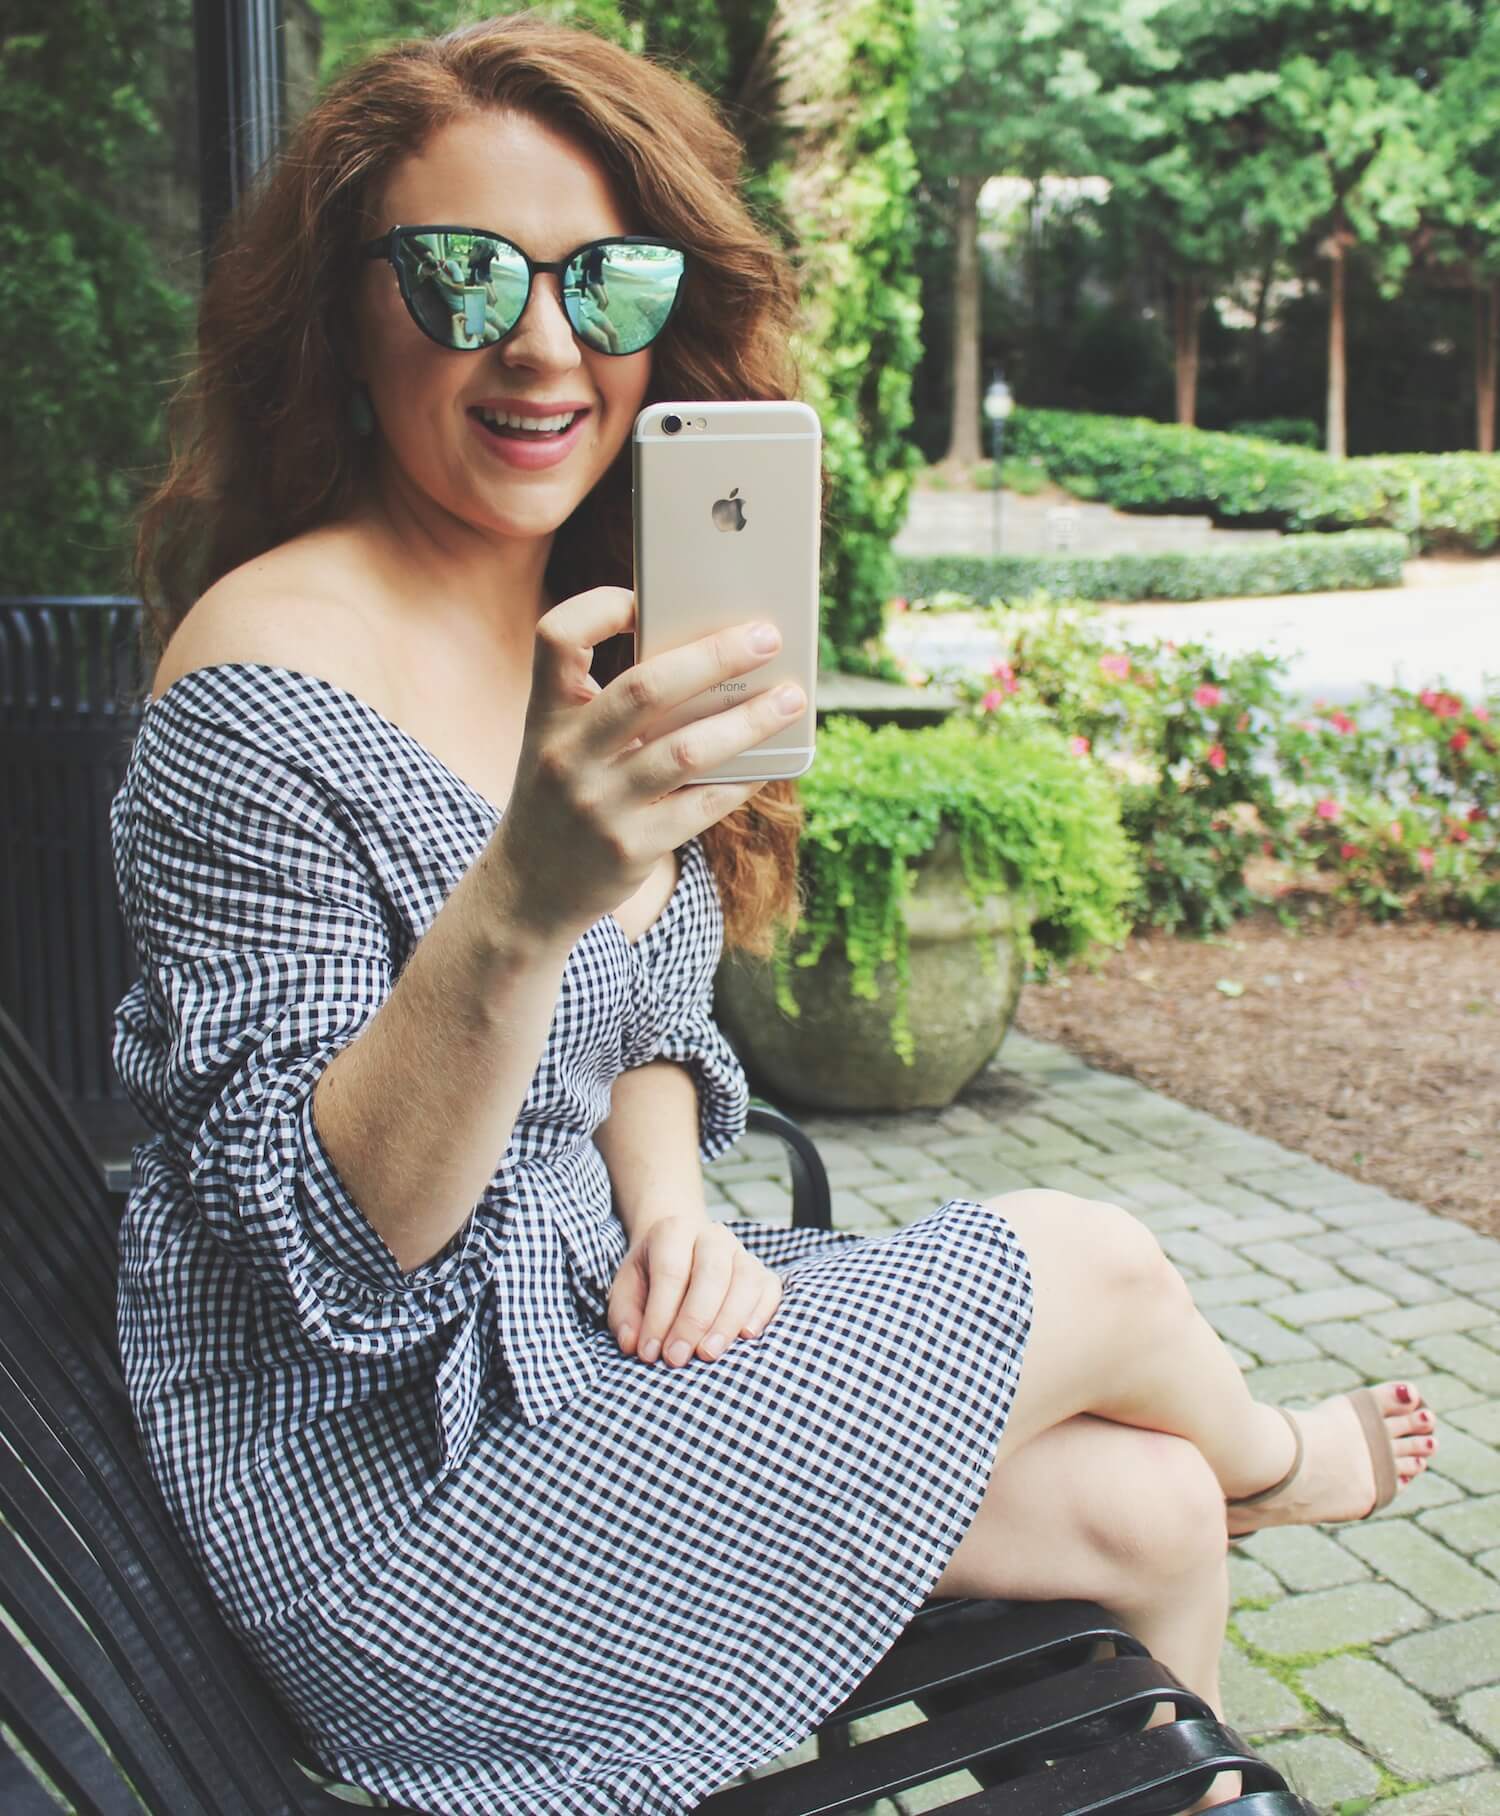 Katherine laughs taking a picture on her phone